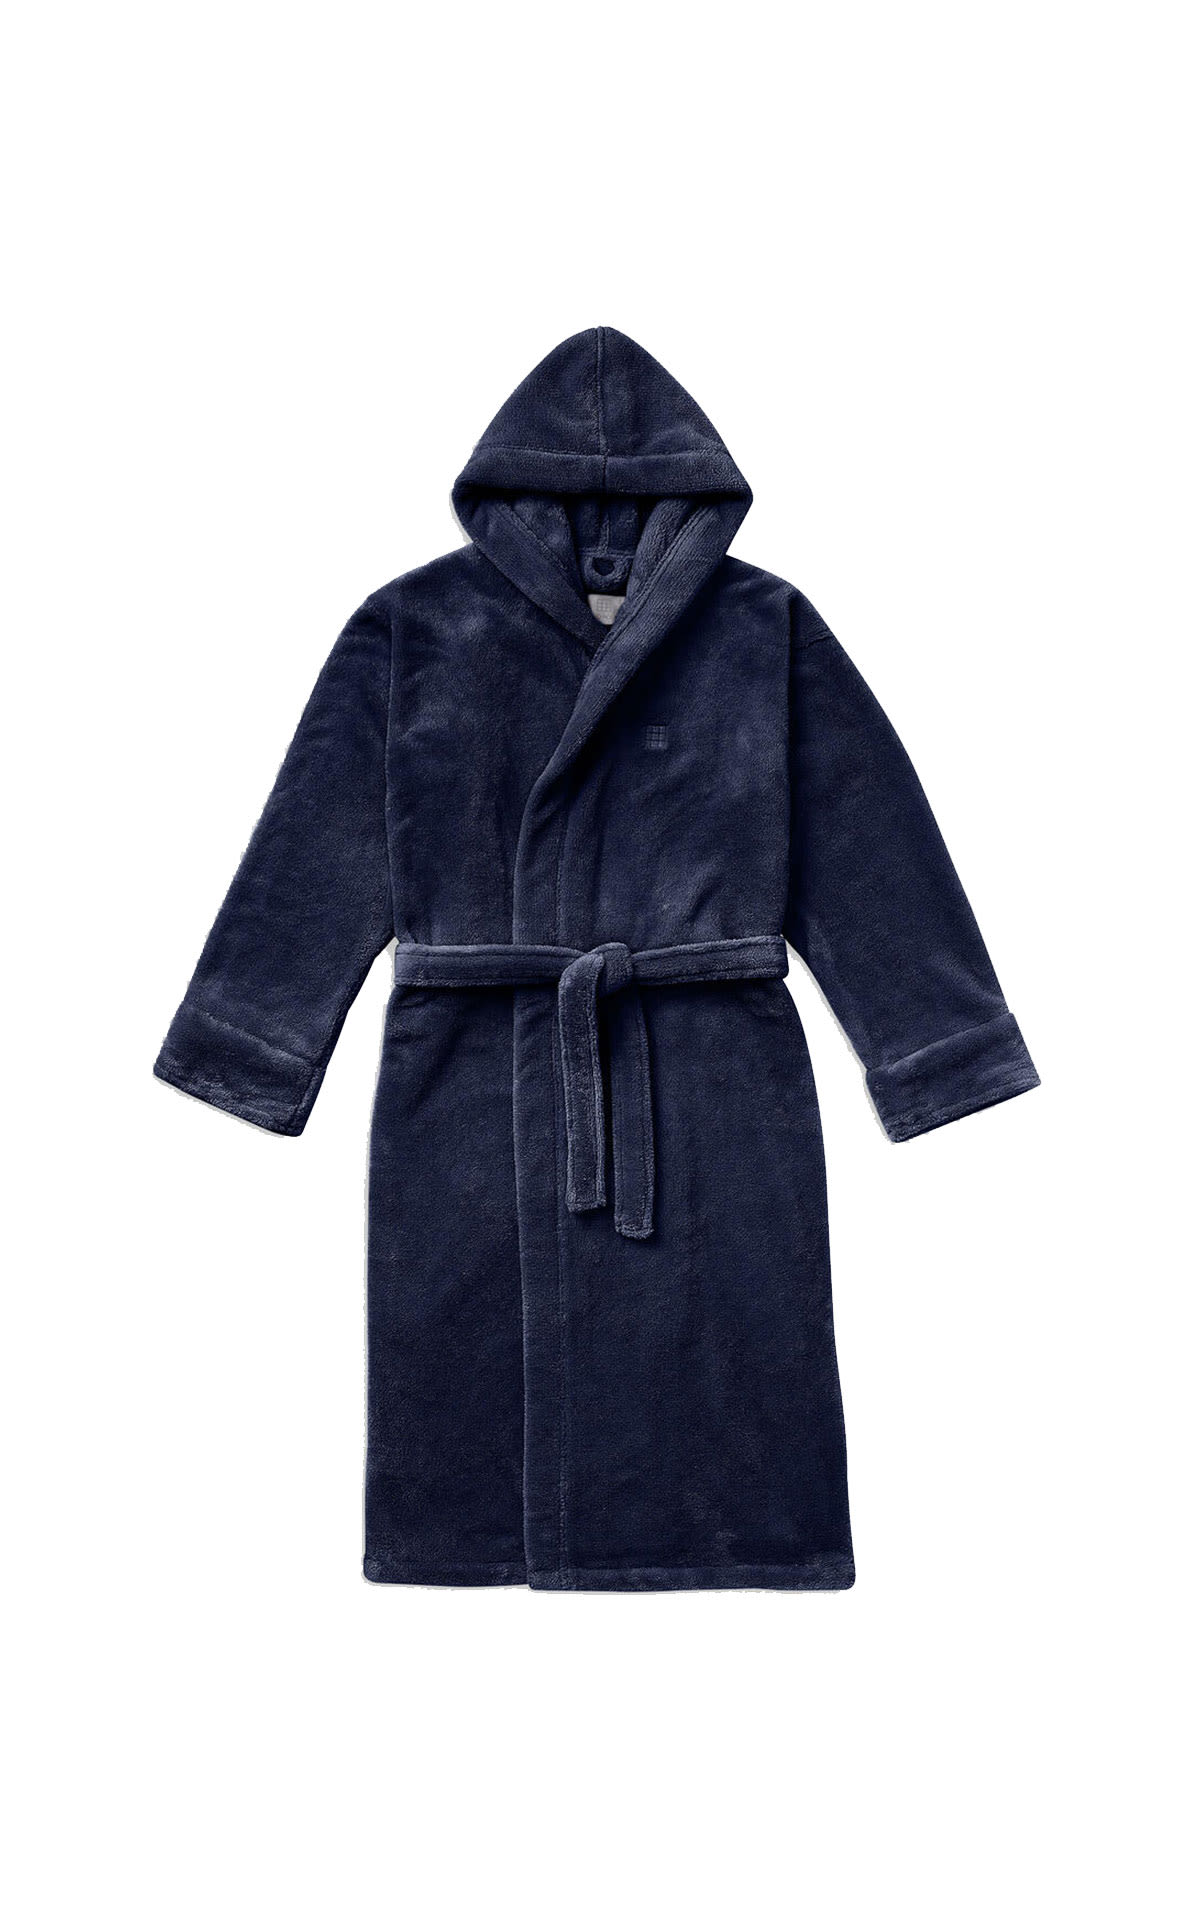 Cowshed House robe, Blue from Bicester Village